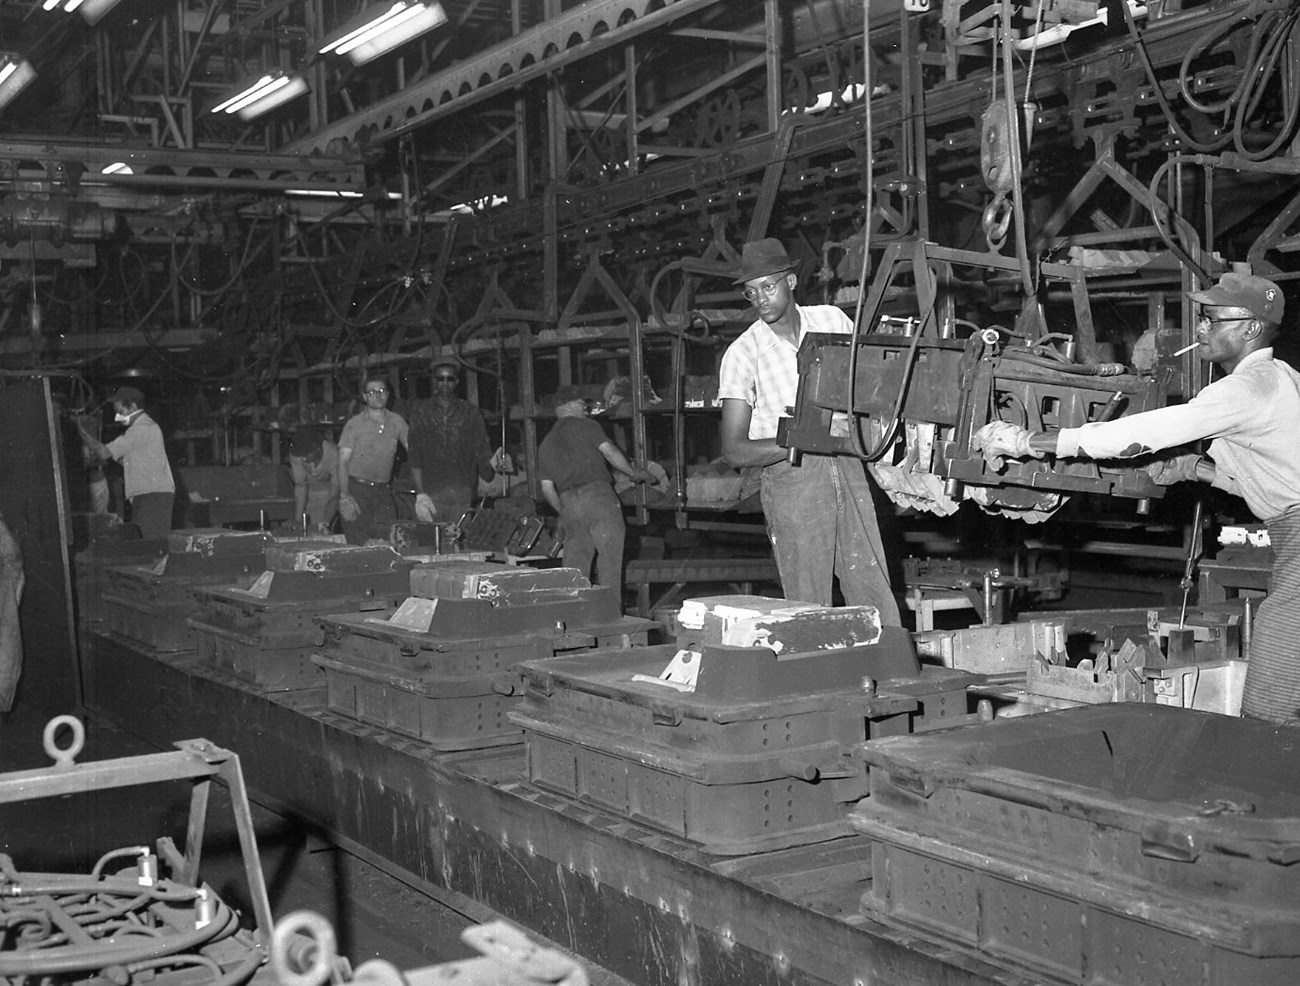 Men working on the Flint Buick assembly line